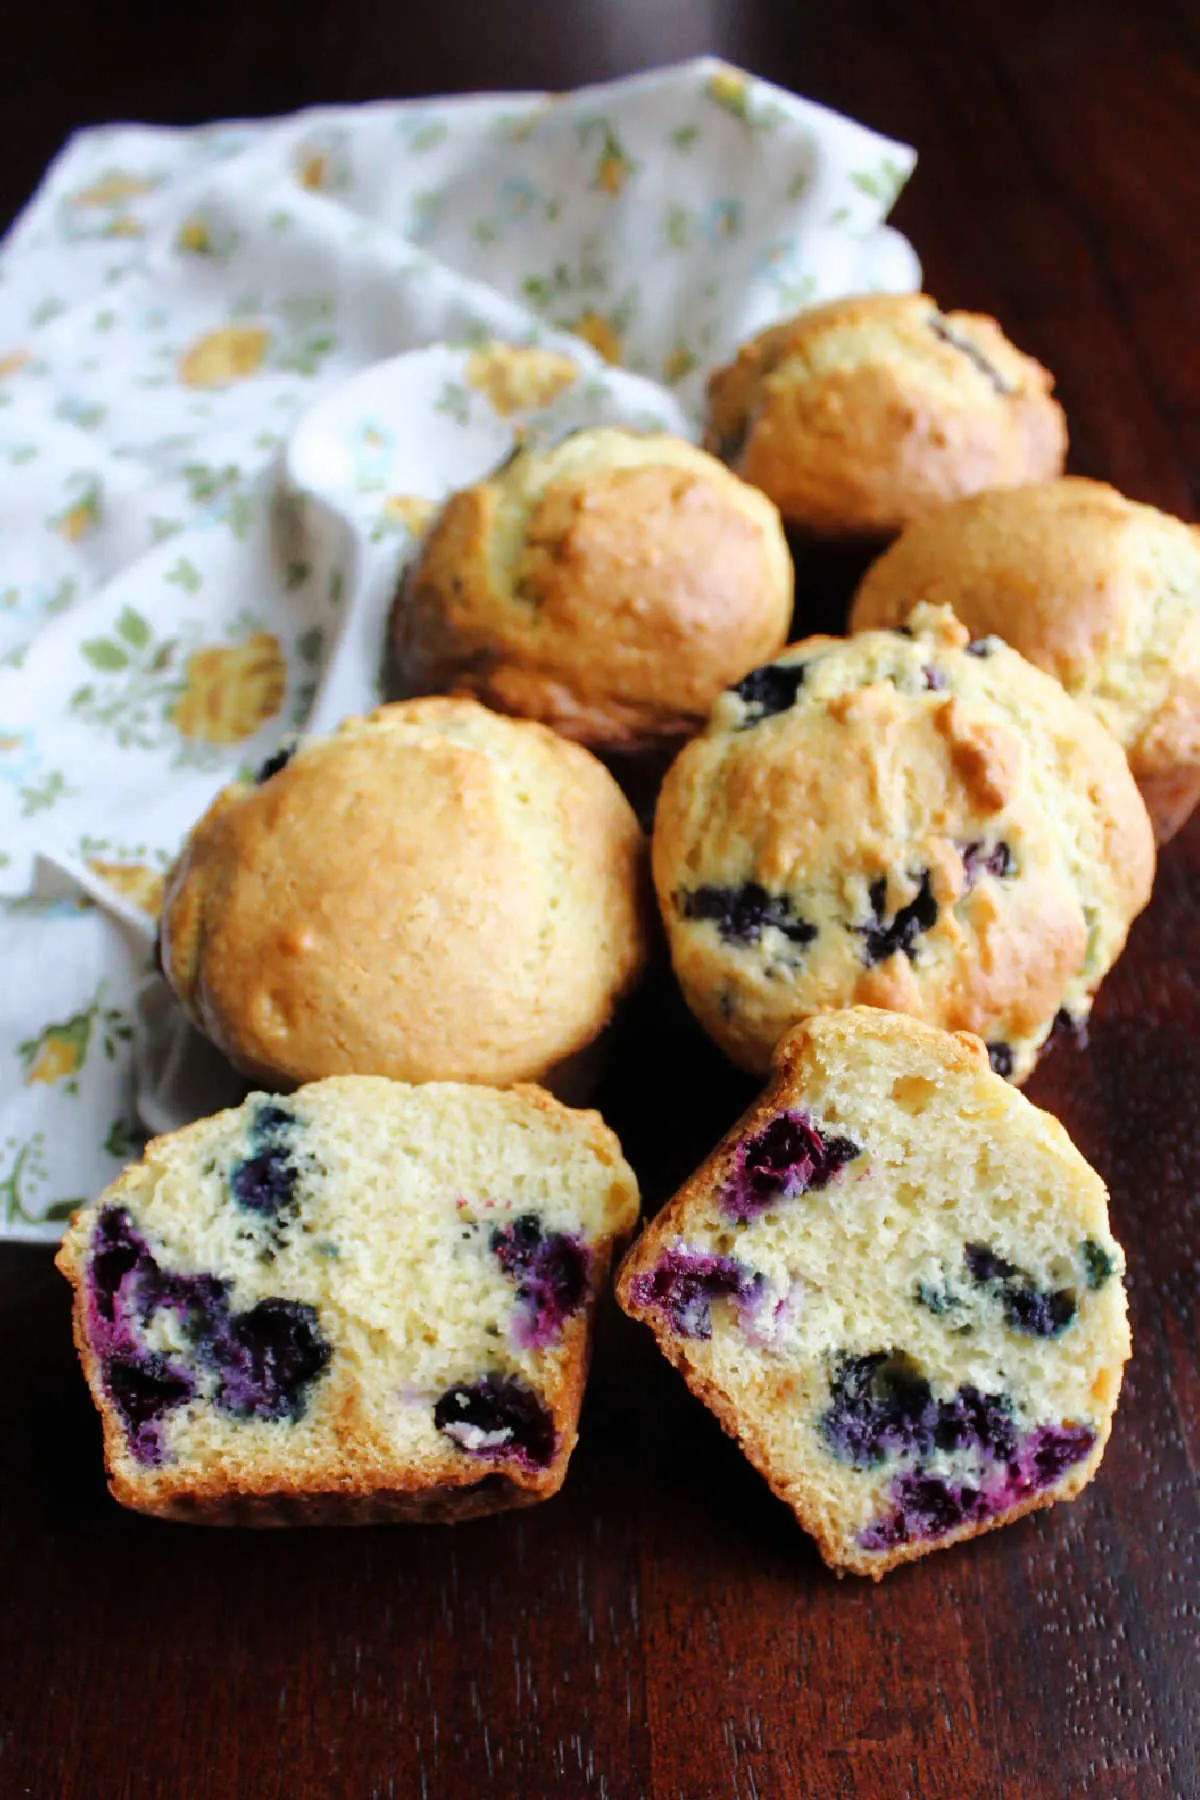 pile of fresh baked muffins with one cut in half showing berries and soft interior.